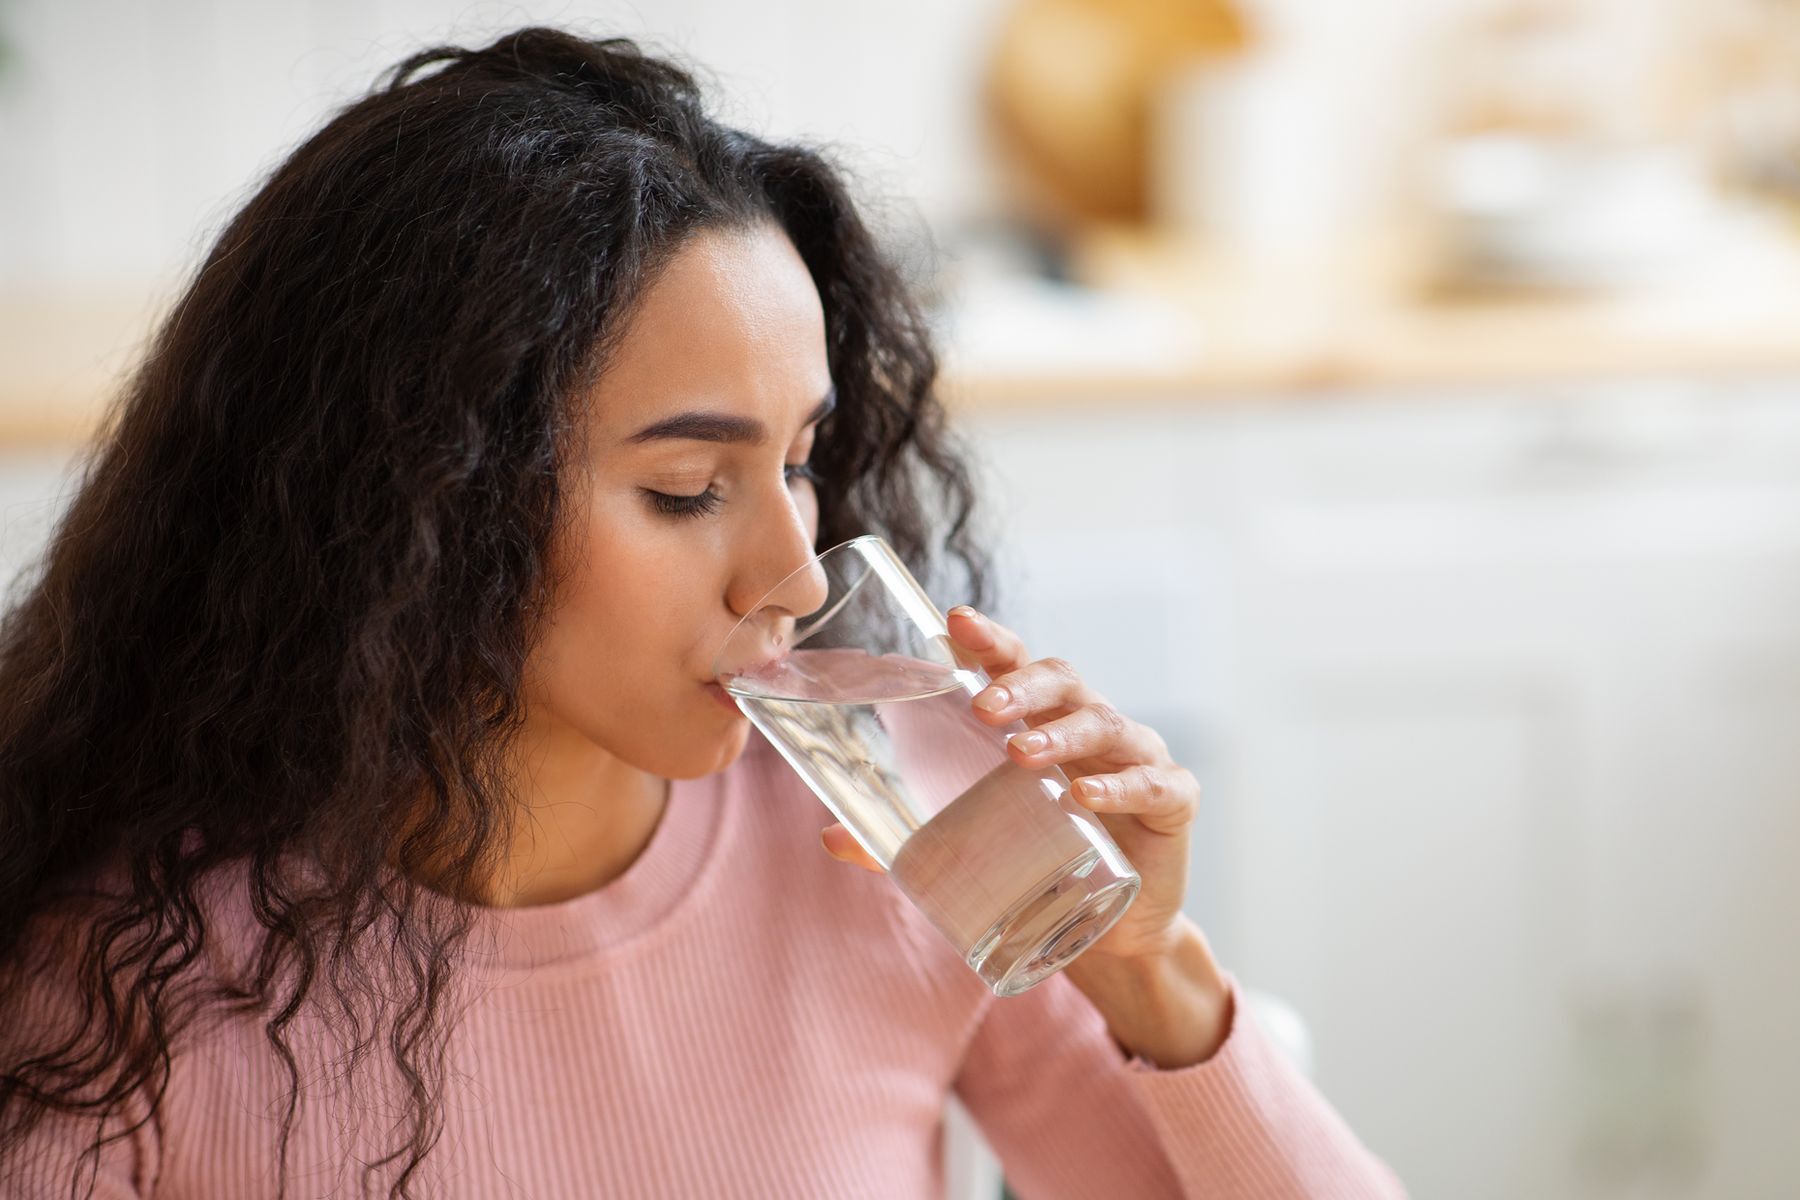 <p>Proper hydration is critical for maintaining healthy liver function. According to the <a href="https://www.mayoclinichealthsystem.org/hometown-health/speaking-of-health/water-essential-to-your-body" title="https://www.mayoclinichealthsystem.org/hometown-health/speaking-of-health/water-essential-to-your-body">Mayo Clinic</a>, water lessens the burden on both your kidneys and liver, by helping to flush our waste and toxins. Every day your body loses eight to 12 cups of water, although <a href="https://www.realsimple.com/health/how-much-water-to-drink-day">how much water you need to drink</a> differs from person to person based on a variety of factors including activity level, climate, age, diet and medications. </p>